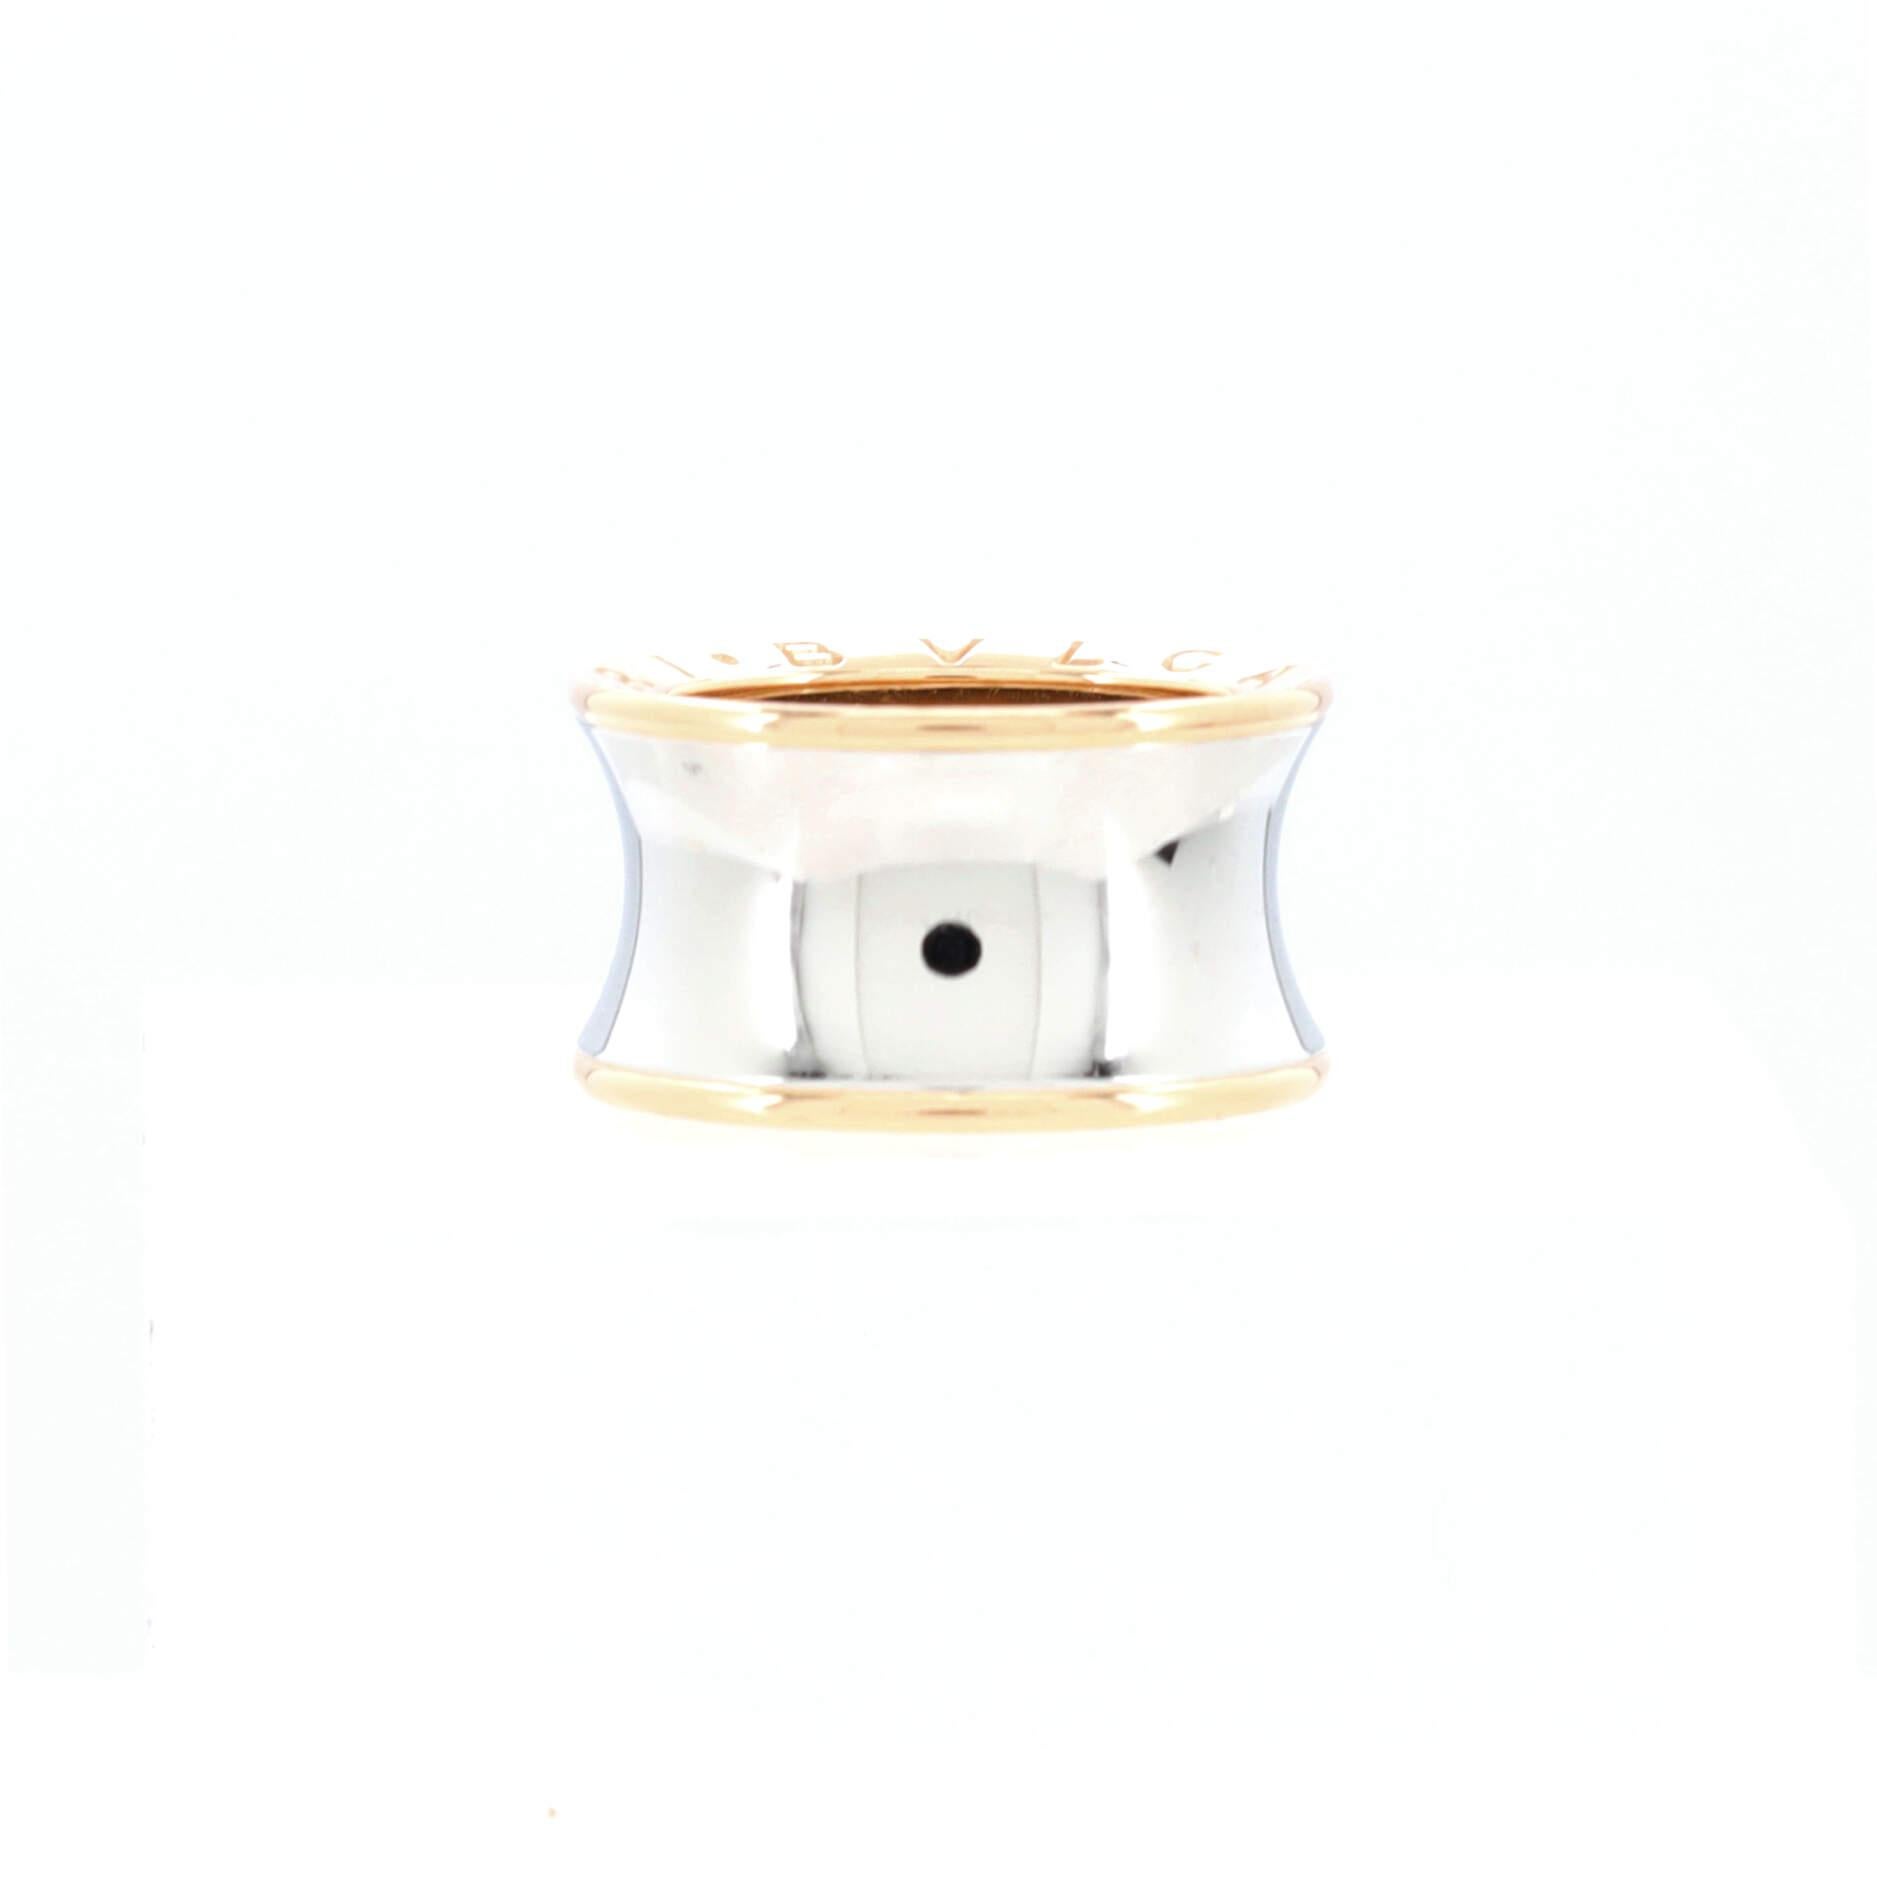 Bvlgari B.Zero1 Anish Kapoor Band Ring 18k Rose Gold and Stainless Steel In Good Condition In New York, NY